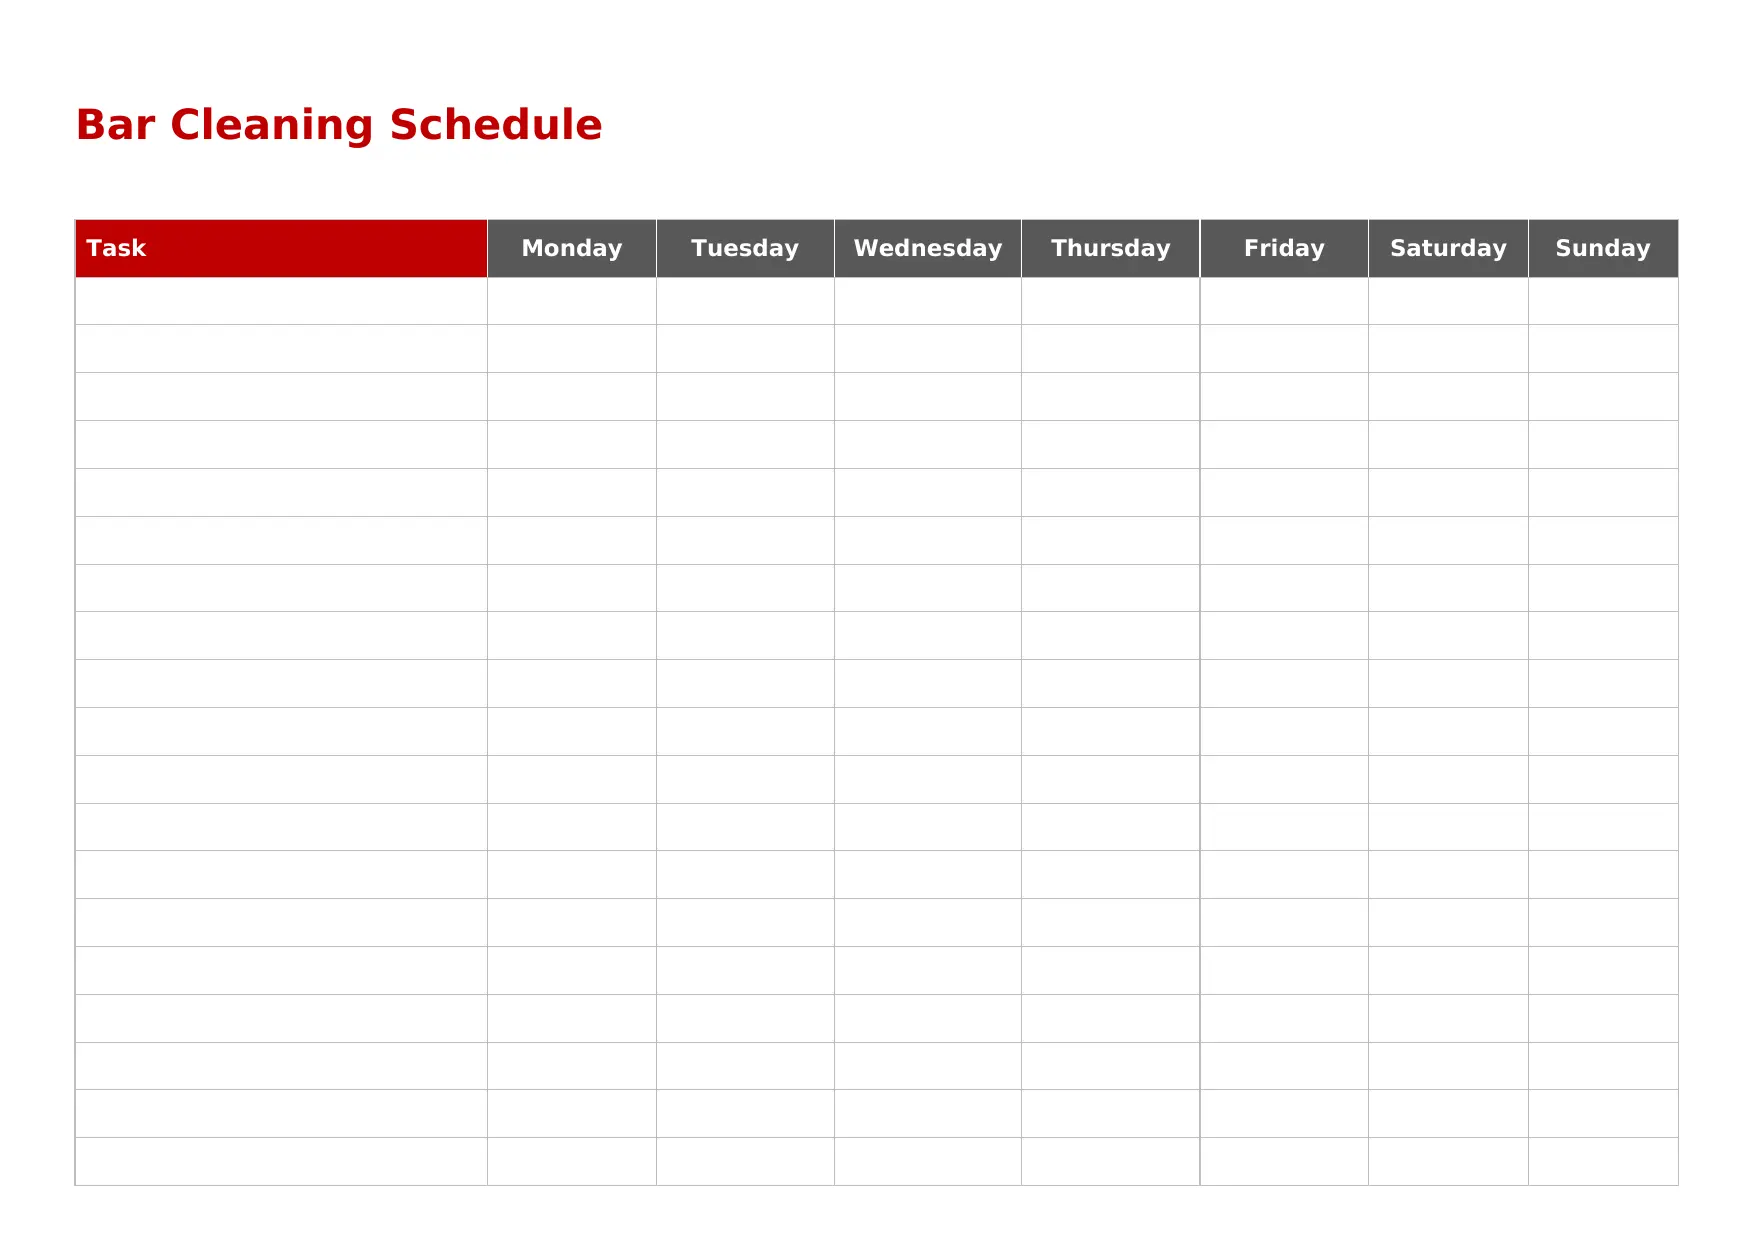 Bar Cleaning Schedule Template